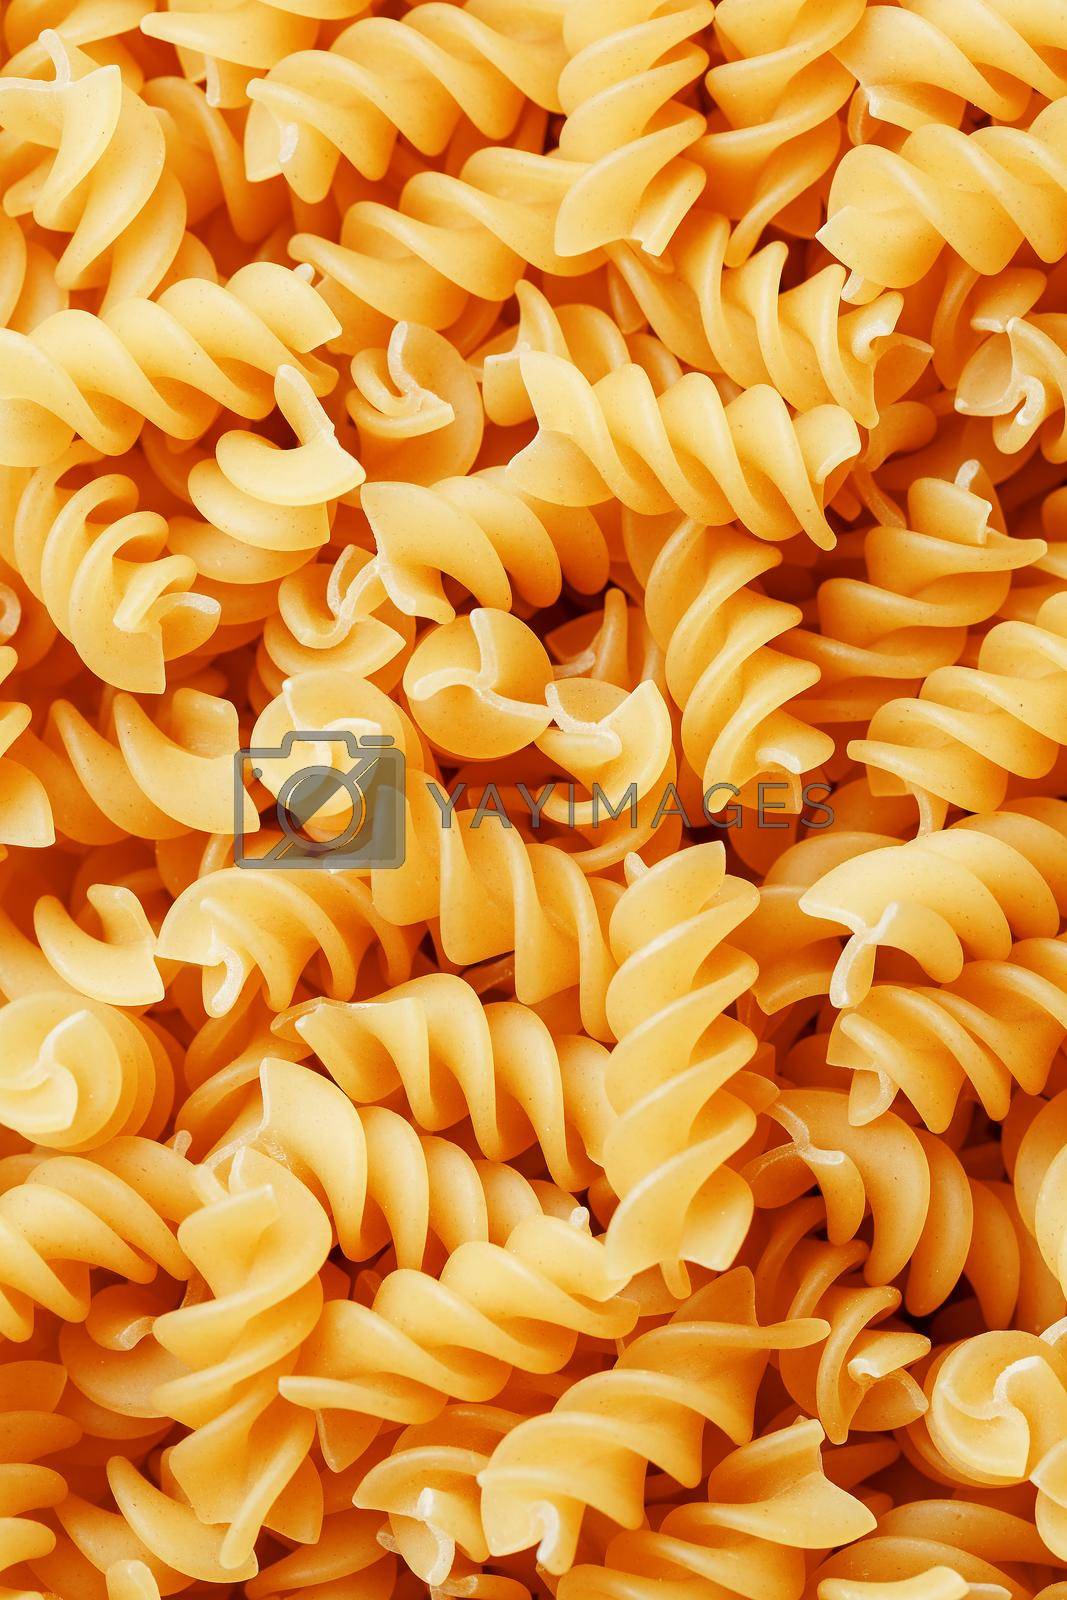 Royalty free image of Background texture and pattern of boiled egg noodles in a spiral or pasta spaghetti screw. in full frame. View from above by AlexGrec